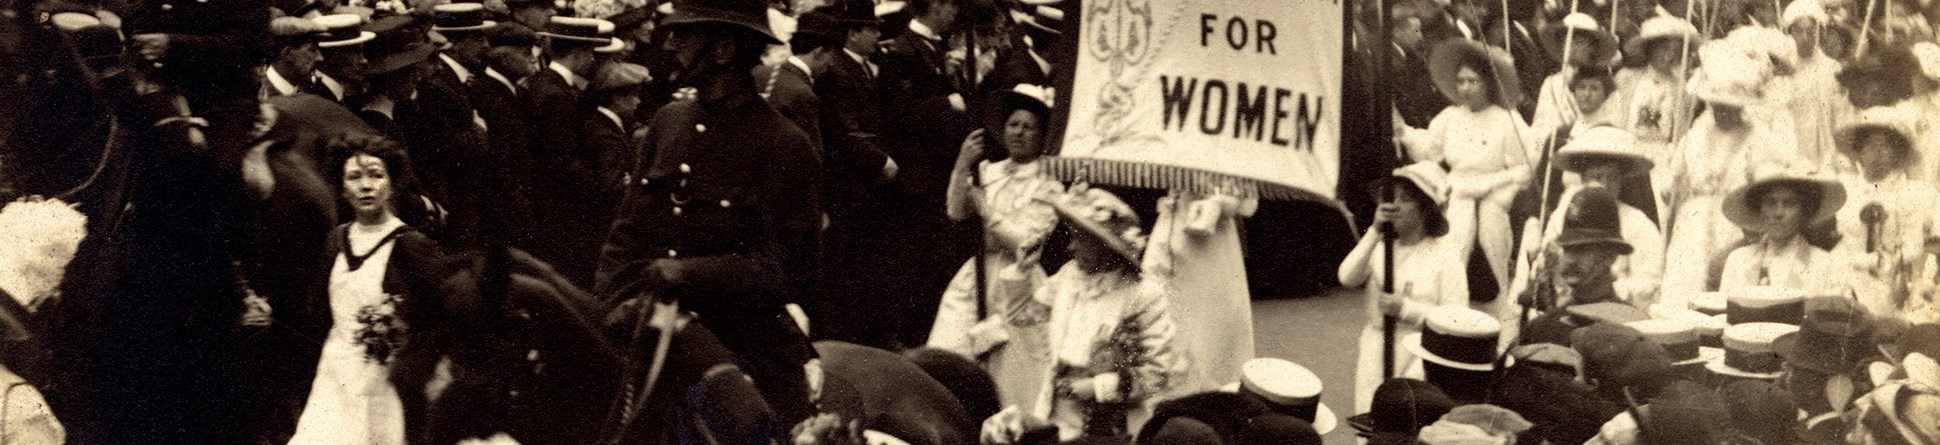 Image of a Suffragette Procession on 17 June 1911